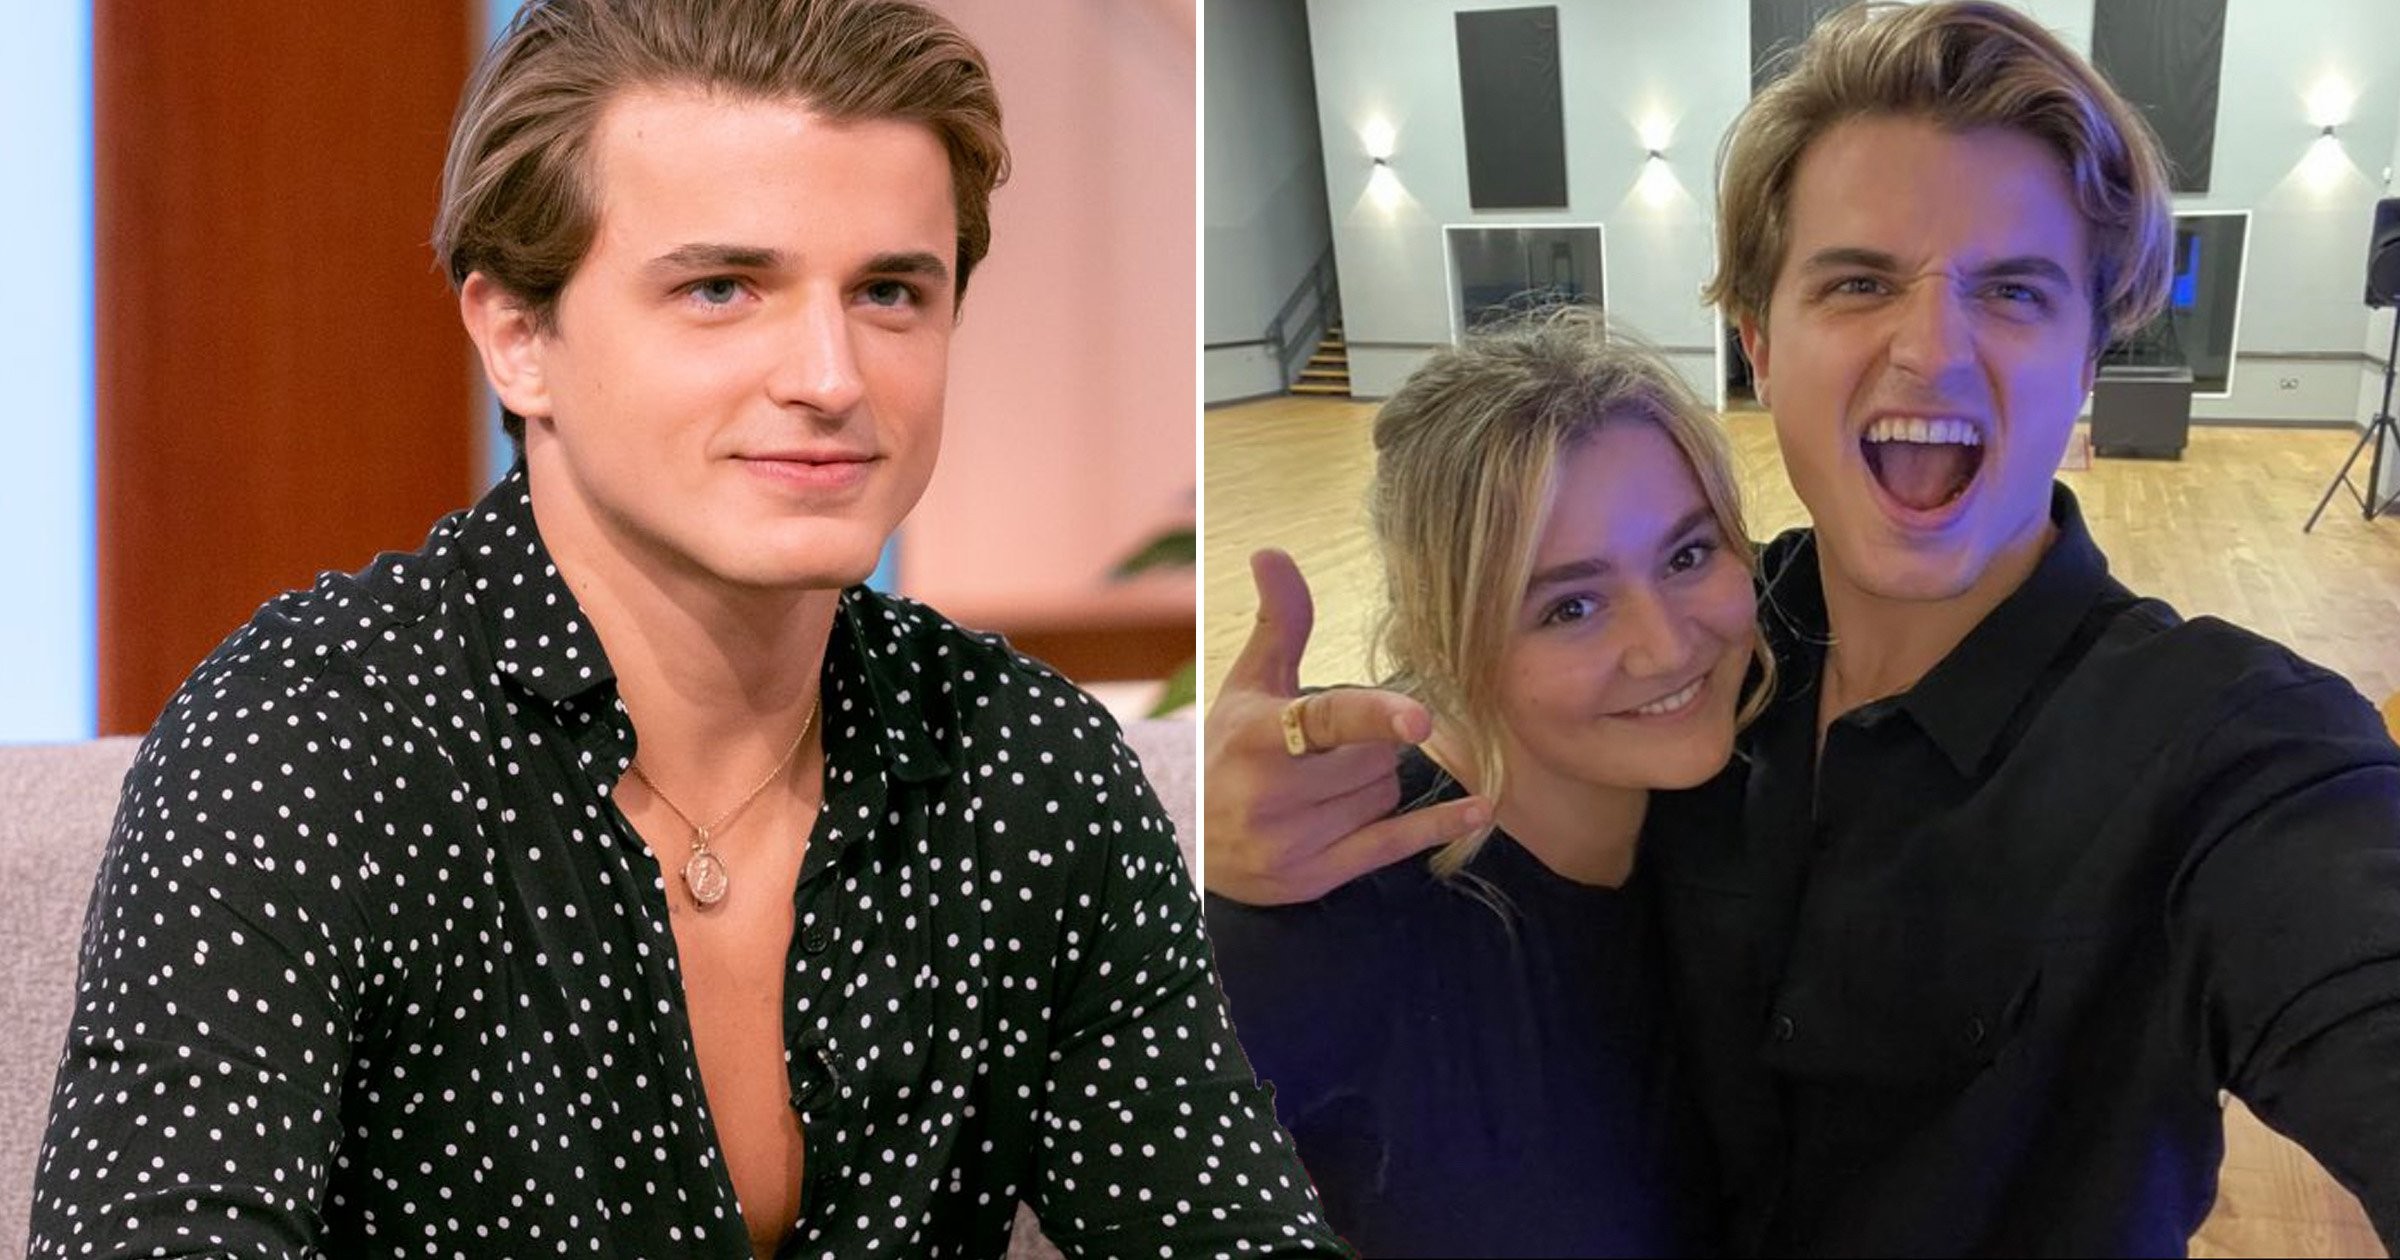 Strictly Come Dancing 2021: How old is Nikita Kuzmin and who is his girlfriend?